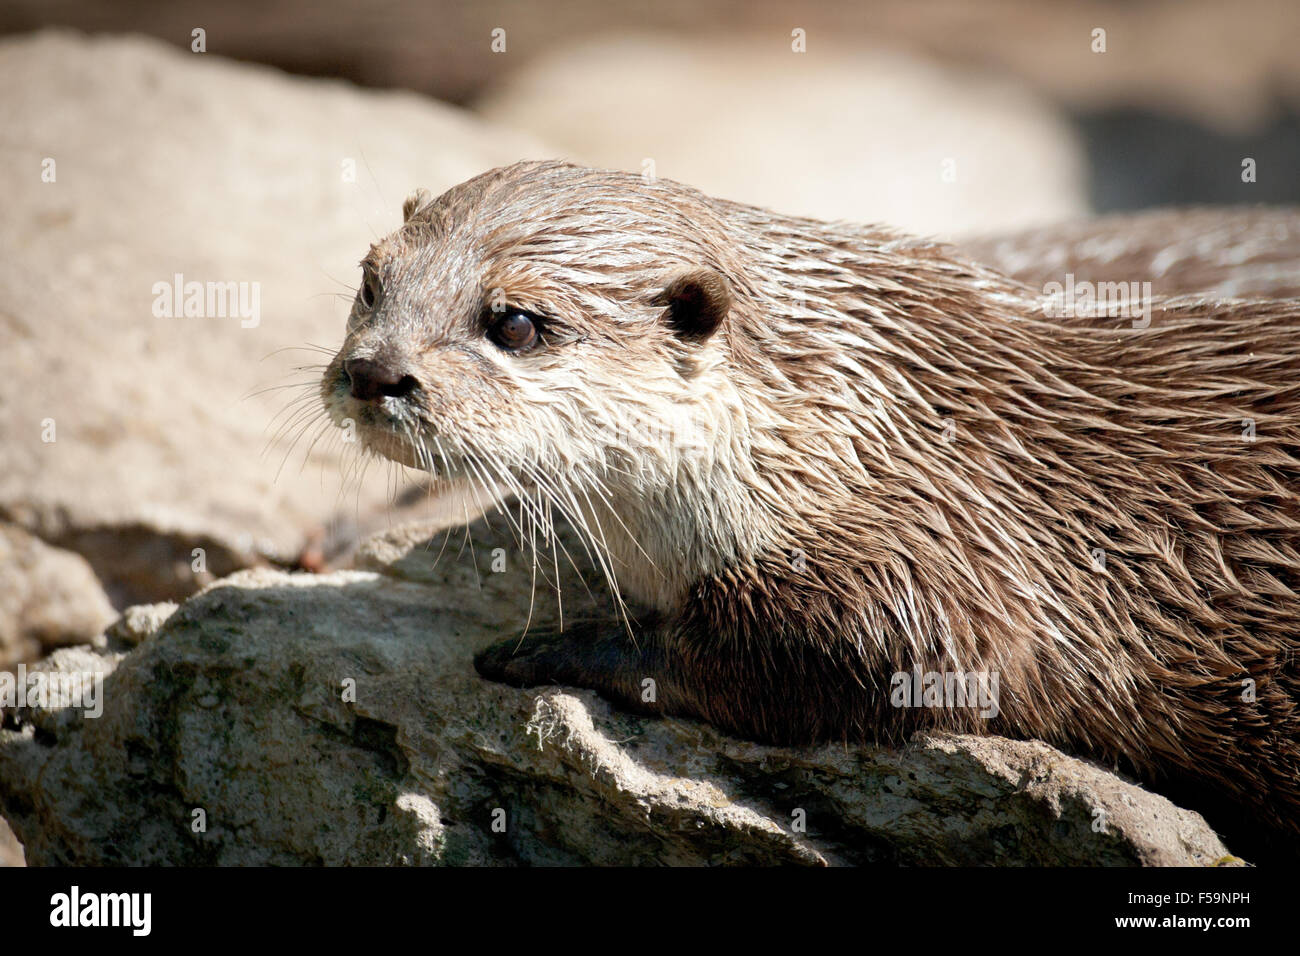 A close-up of an Oriental small-clawed otter from the Copenhagen Zoo in Copenhagen, Denmark. Stock Photo